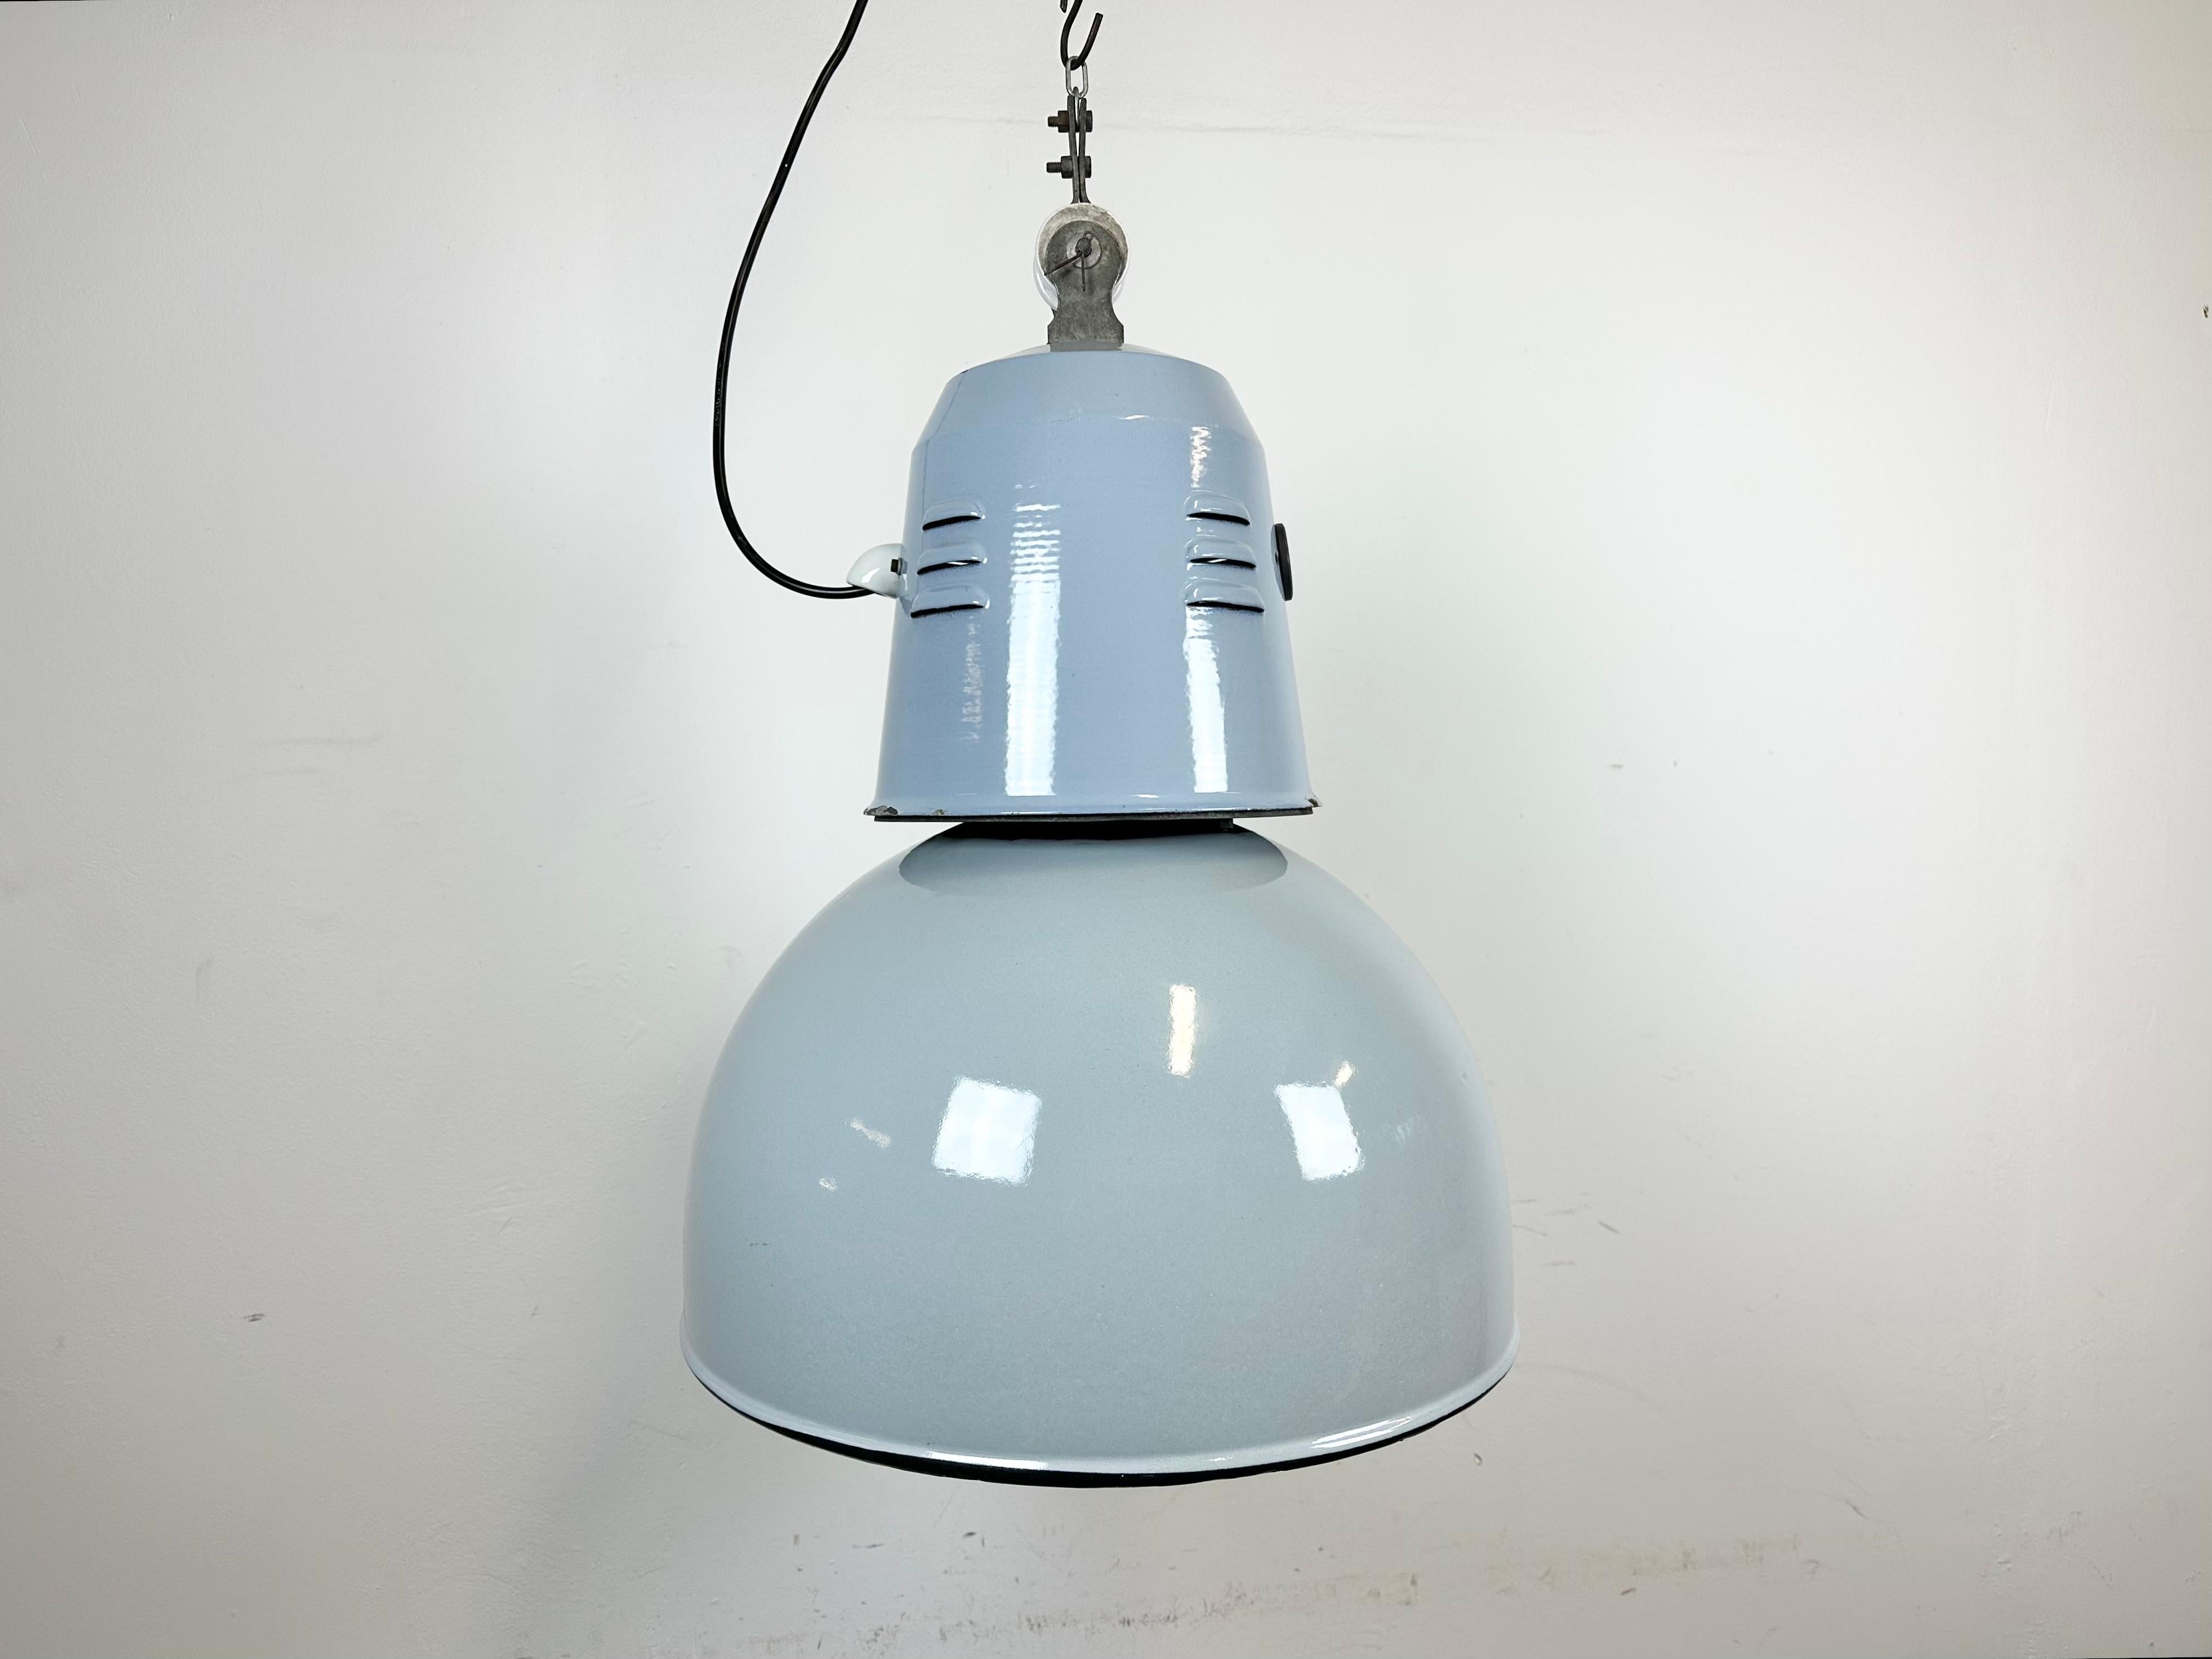 Large grey industrial pendant light produced by Cariboni Milano in Italy during the 1970s. It features a grey enamel body with white enamel interior and an iron top.
New porcelain socket requires E 27/ E26 light bulbs. New wire. The weight of the